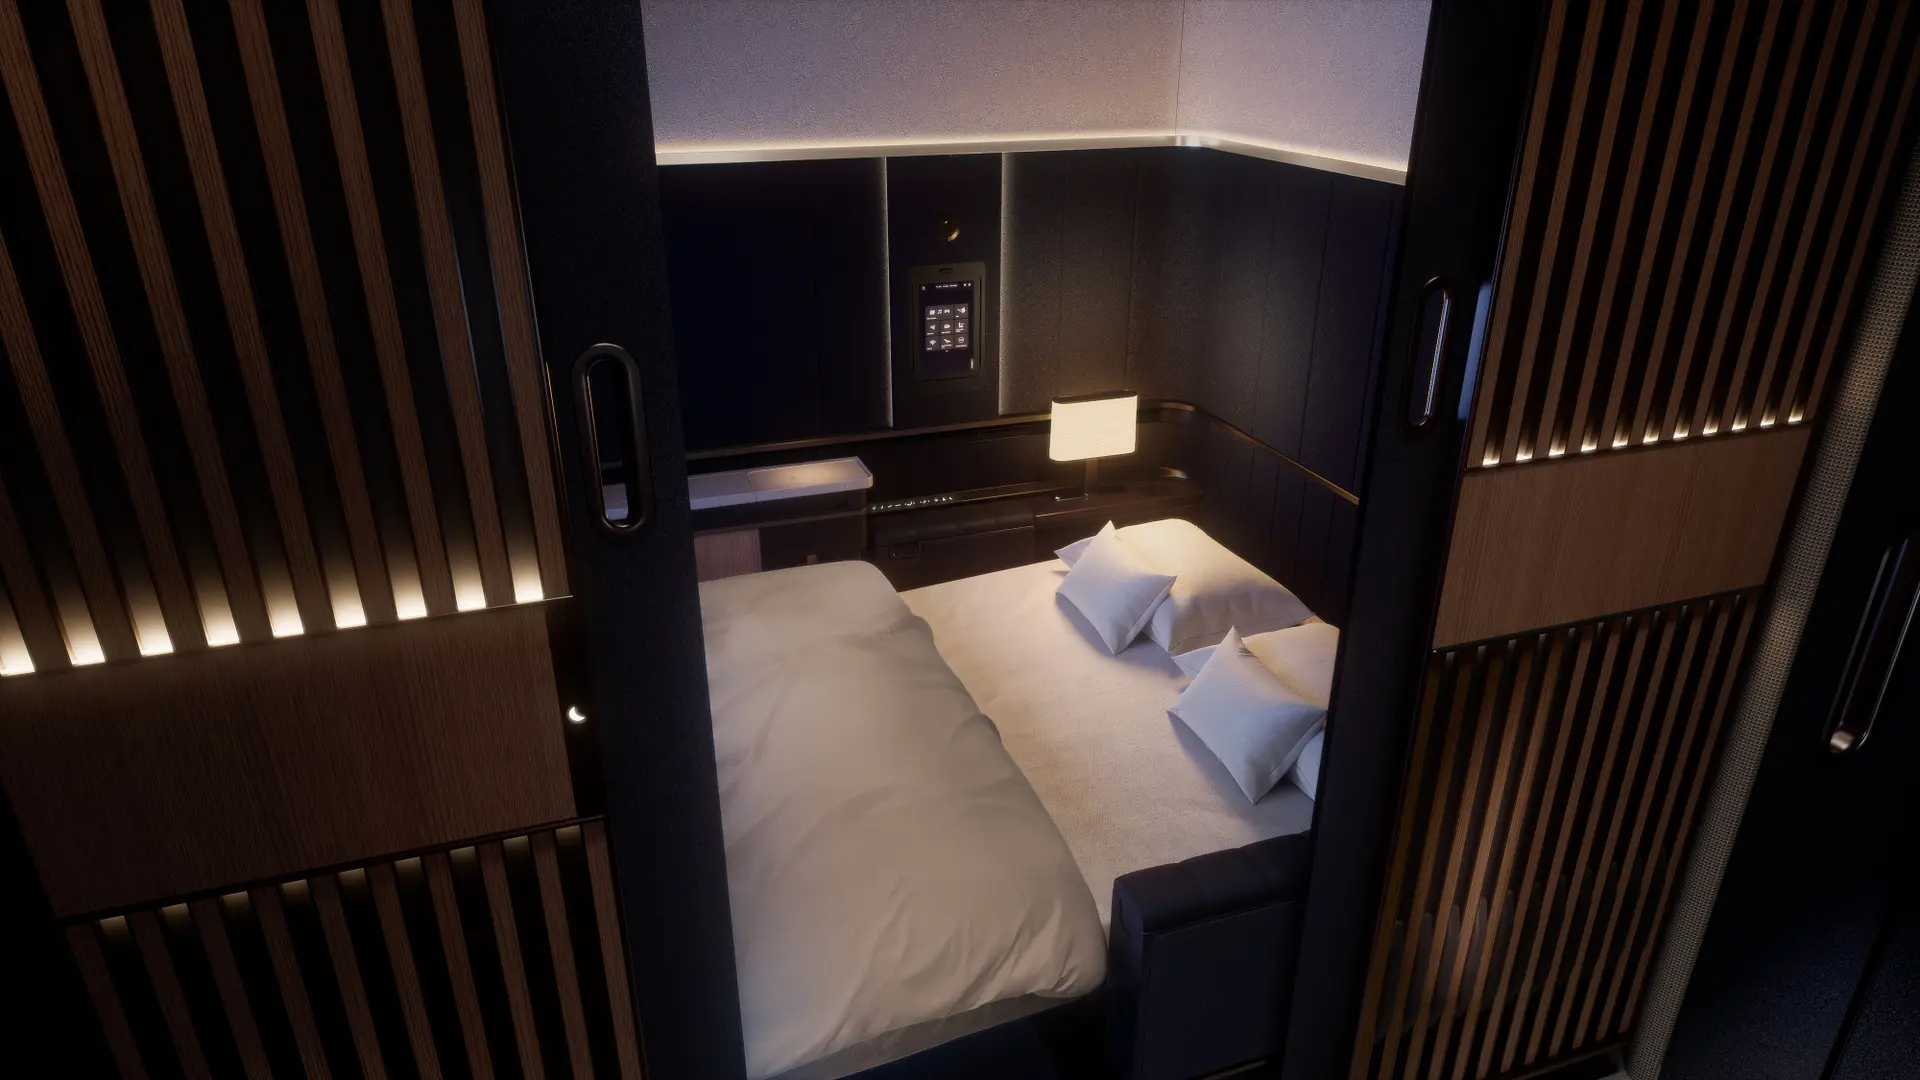 Airlines News - Lufthansa dazzles with new First Class and Business Class cabins 